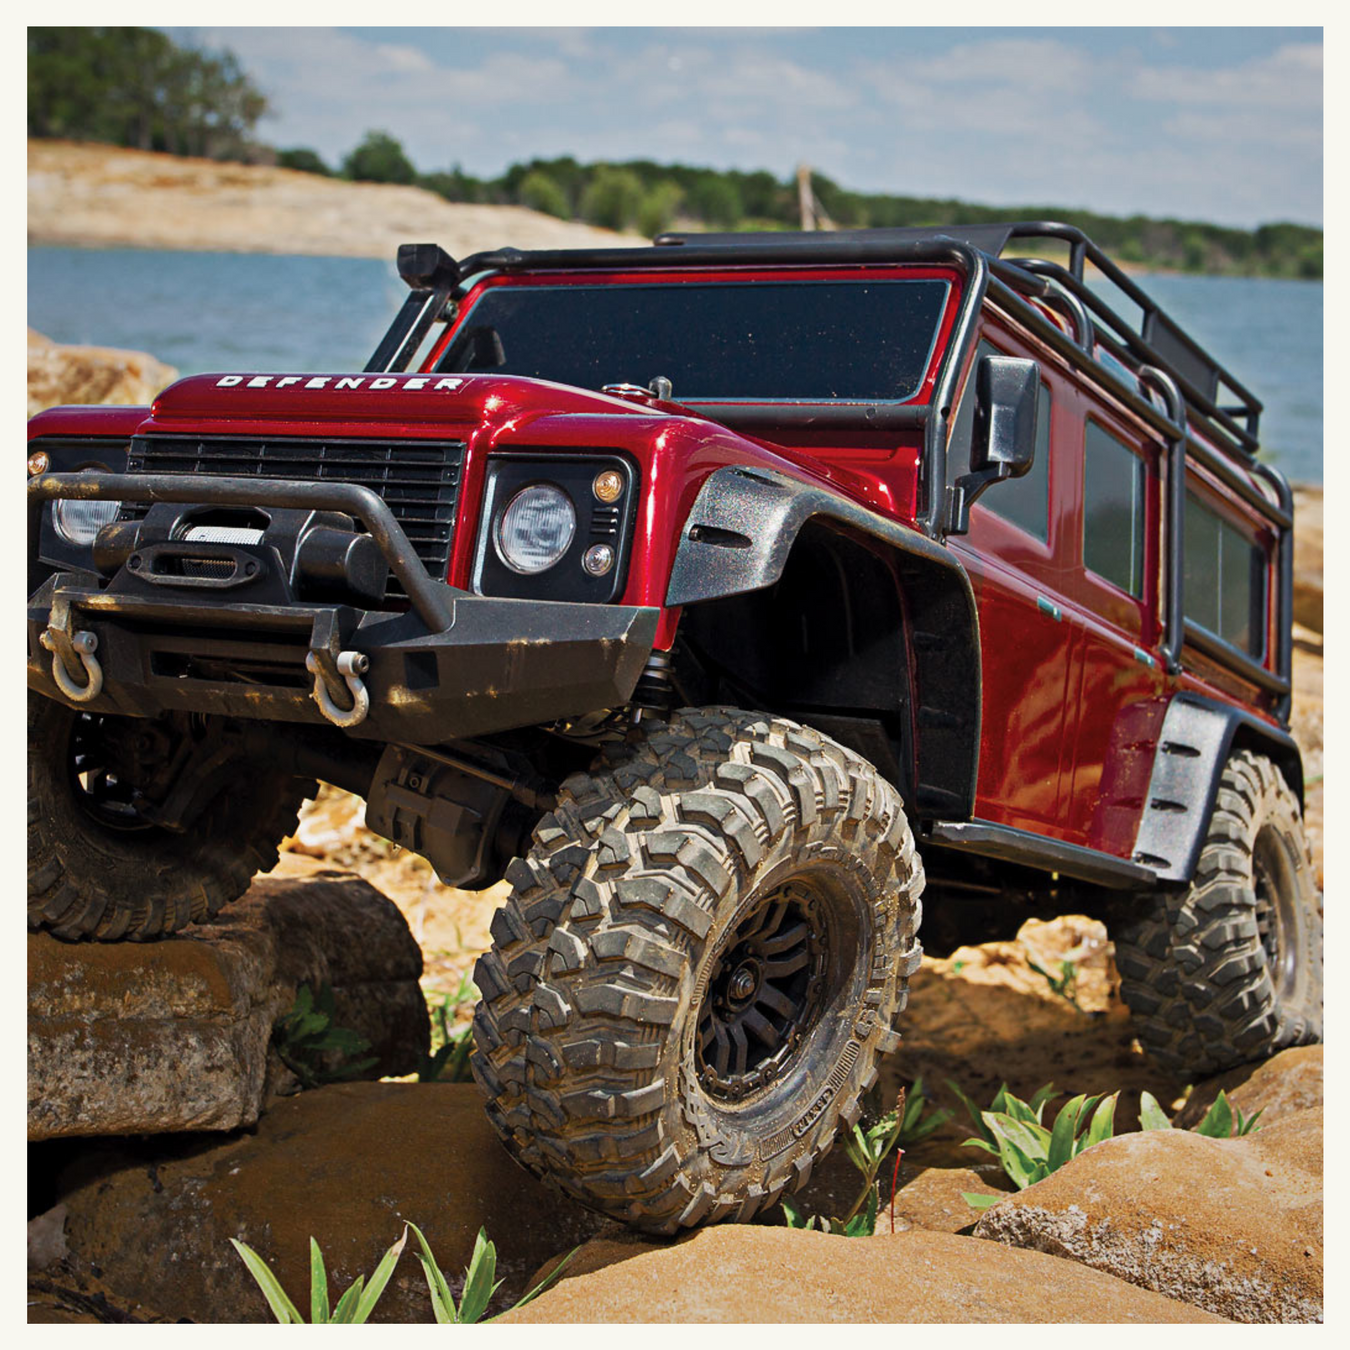 Red Land Rover Defender crawling on rocky shore with lake in the background